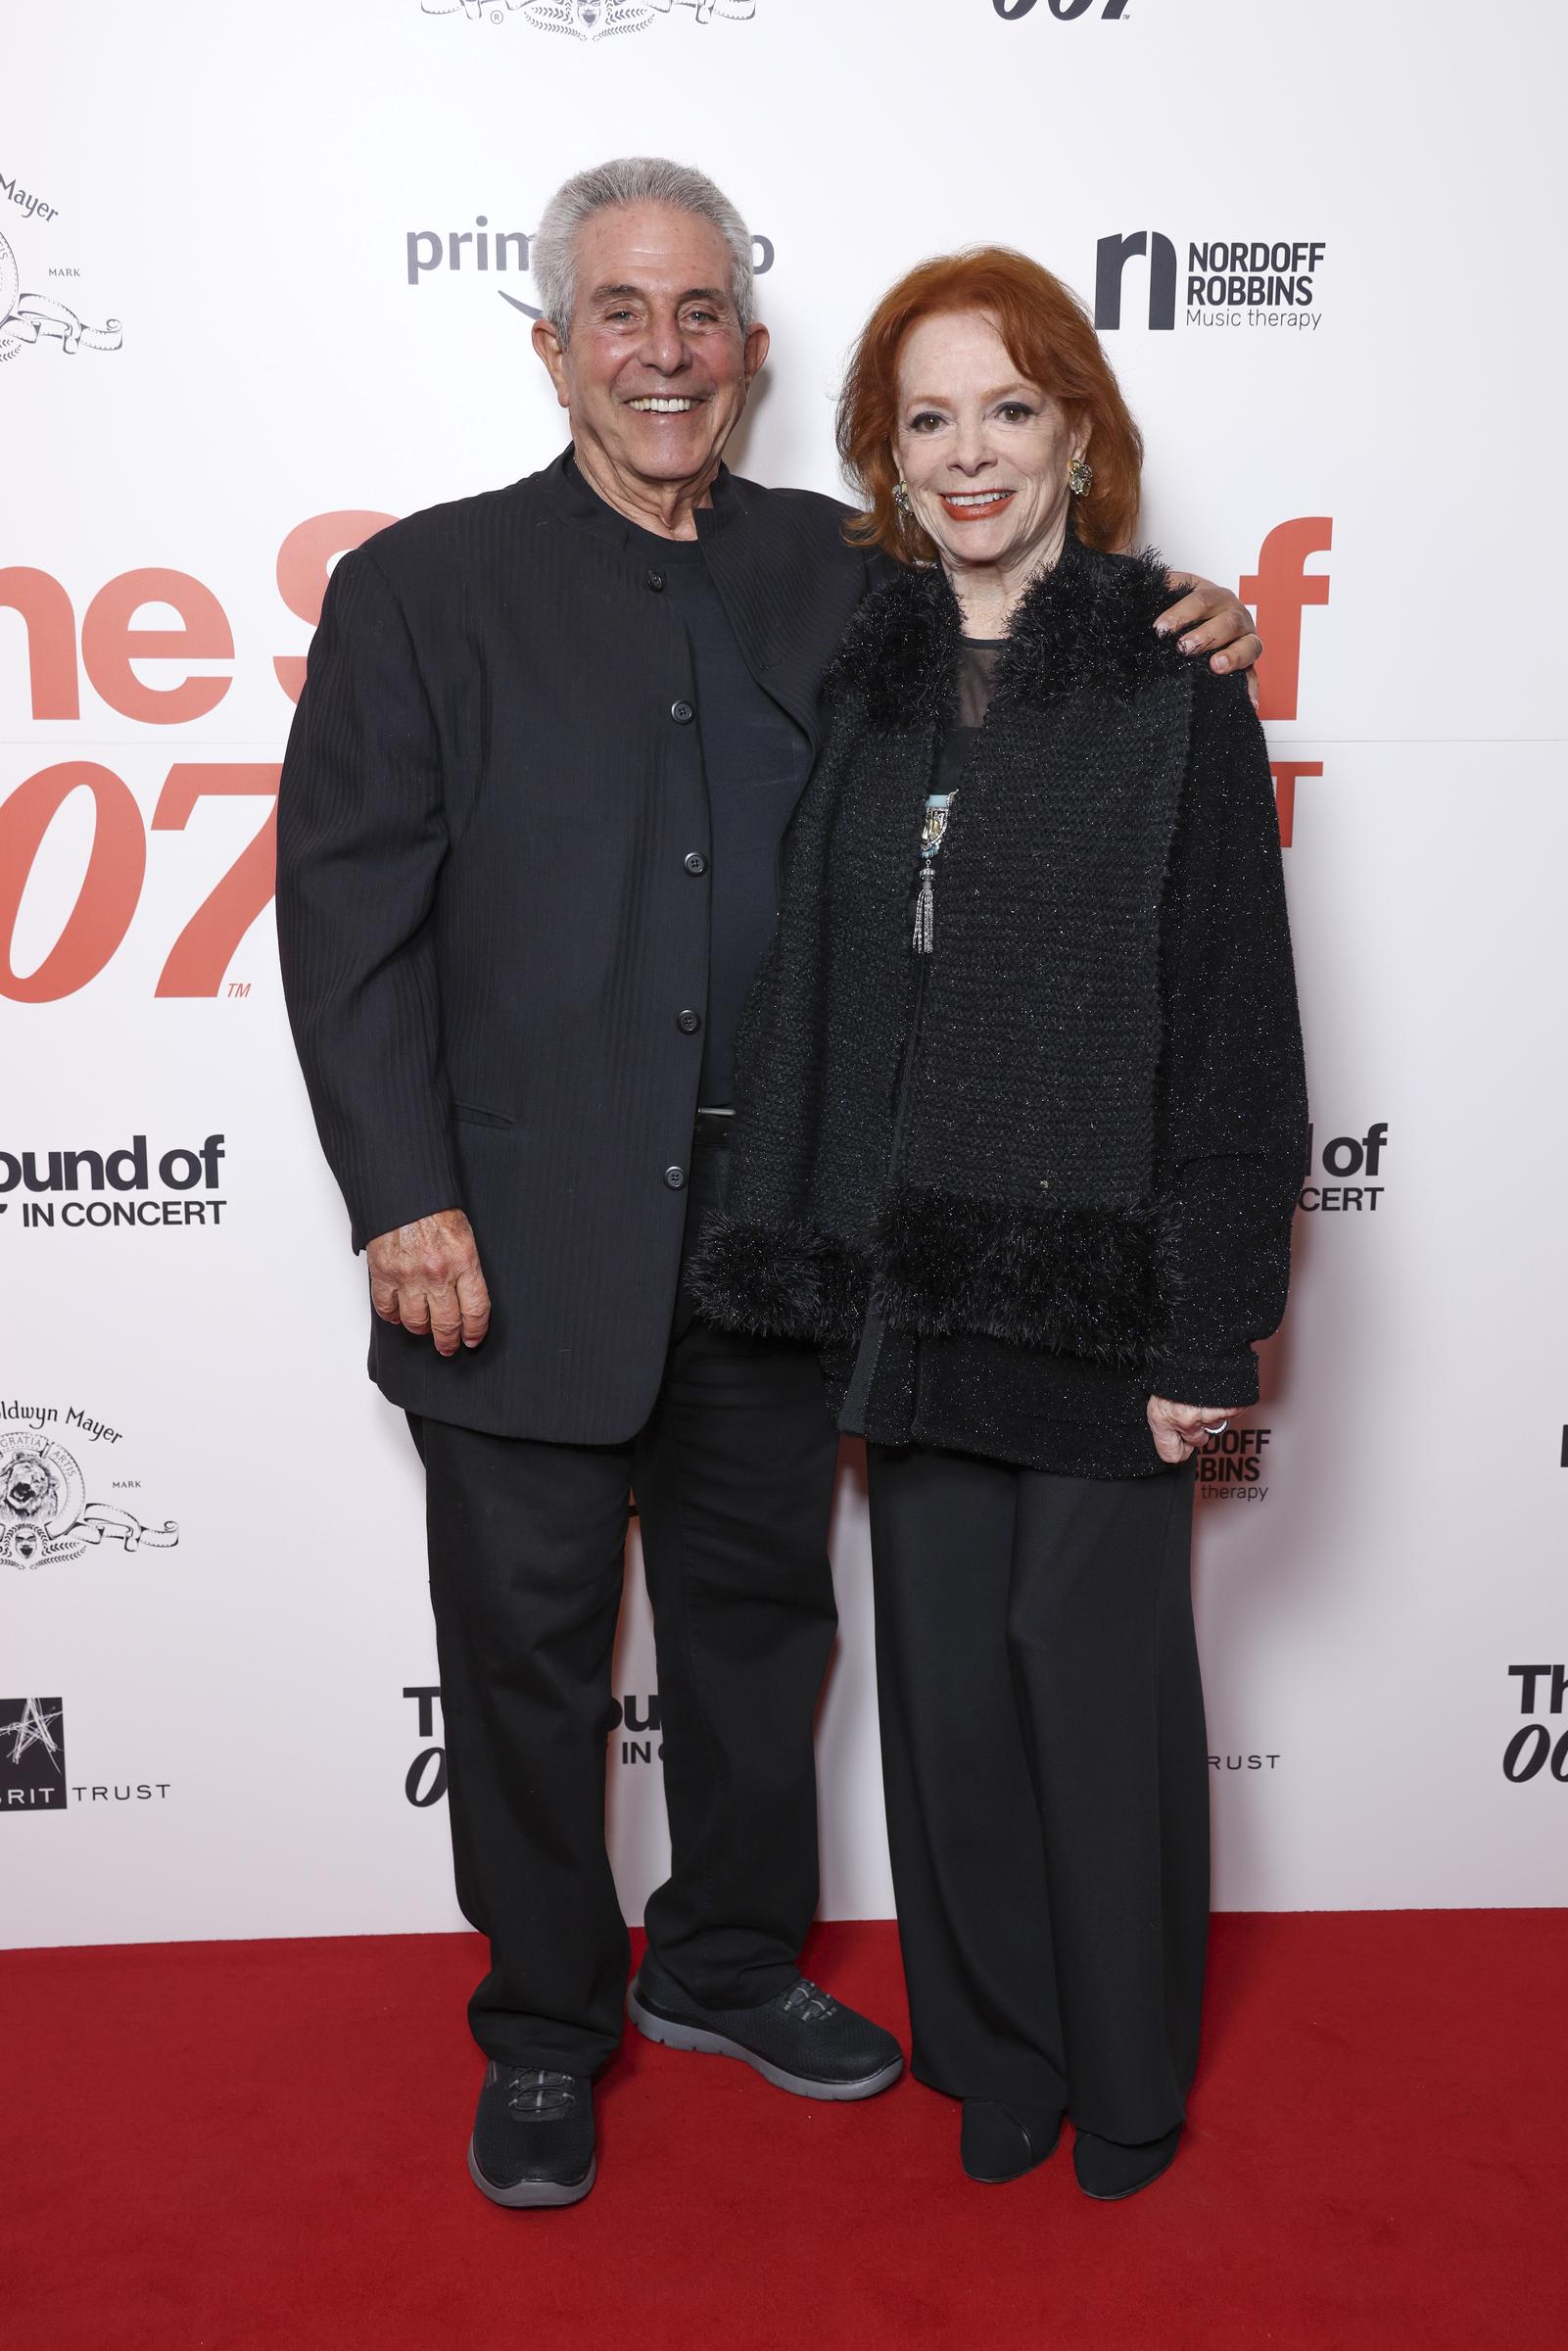 Michael Jay Solomon and Luciana Paluzzi attend The Sound of 007 in concert in London, England, on October 4, 2022. | Source: Getty Images